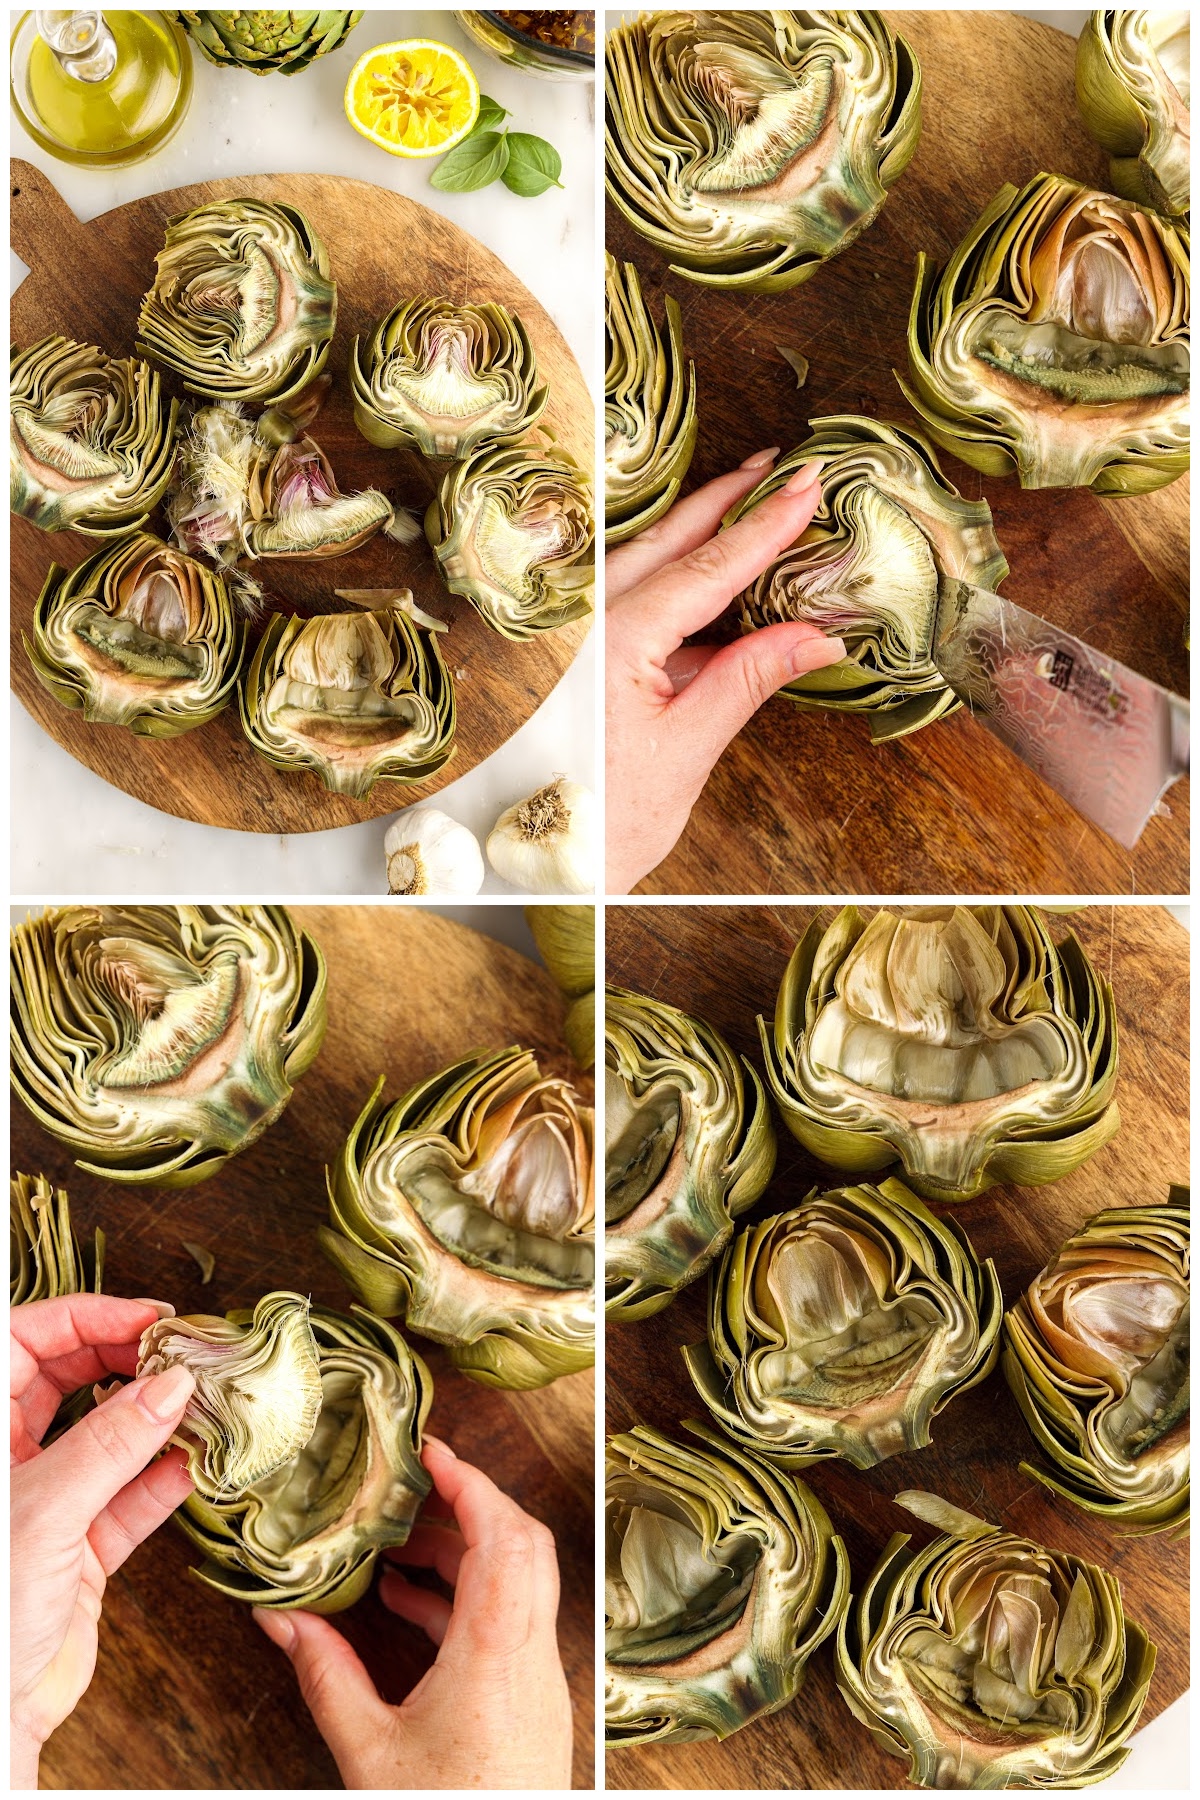 Four images of Grilled Artichokes and the steps to take out the choke.